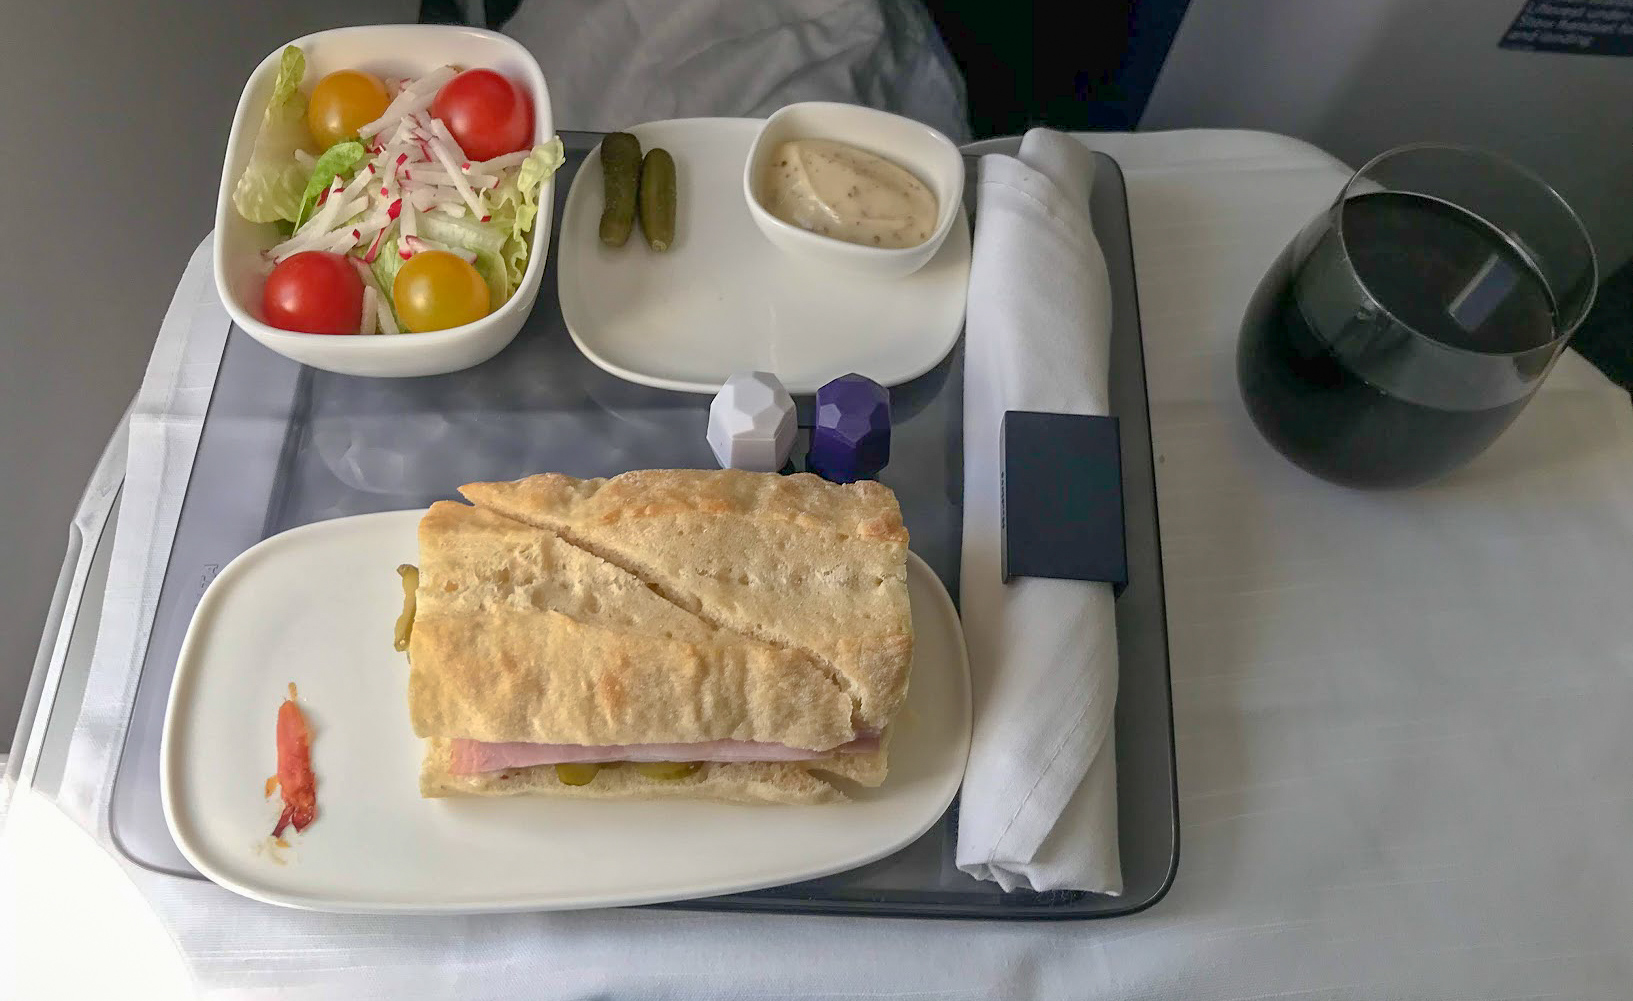 Cuban pork baguette, a plate of dill pickles, side mixed greens salad and a glass of coke on Delta One Delta Air Lines